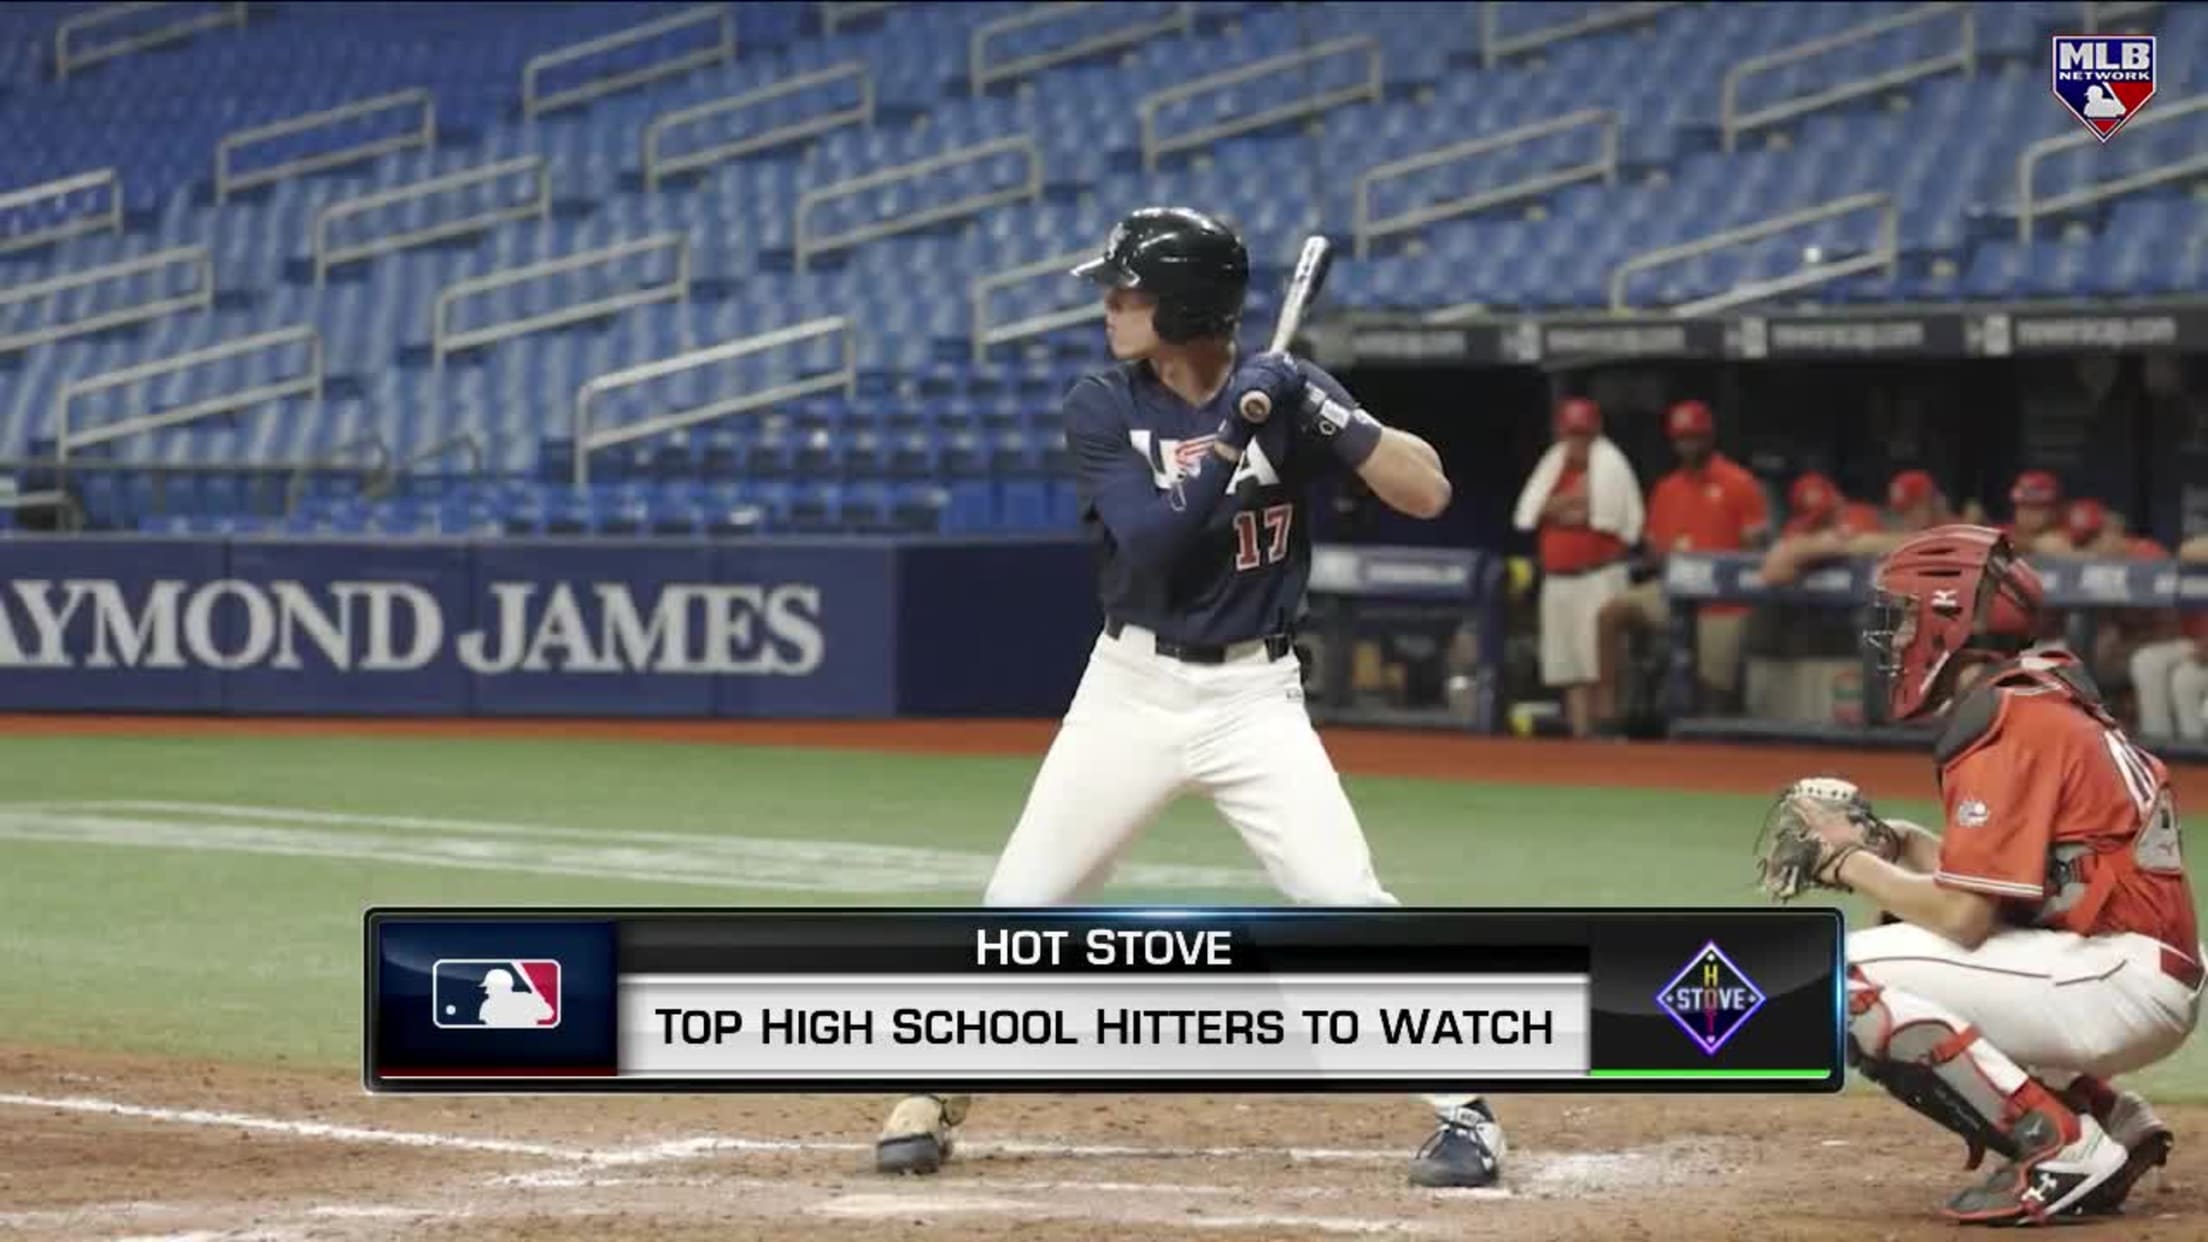 Top high school hitters to watch